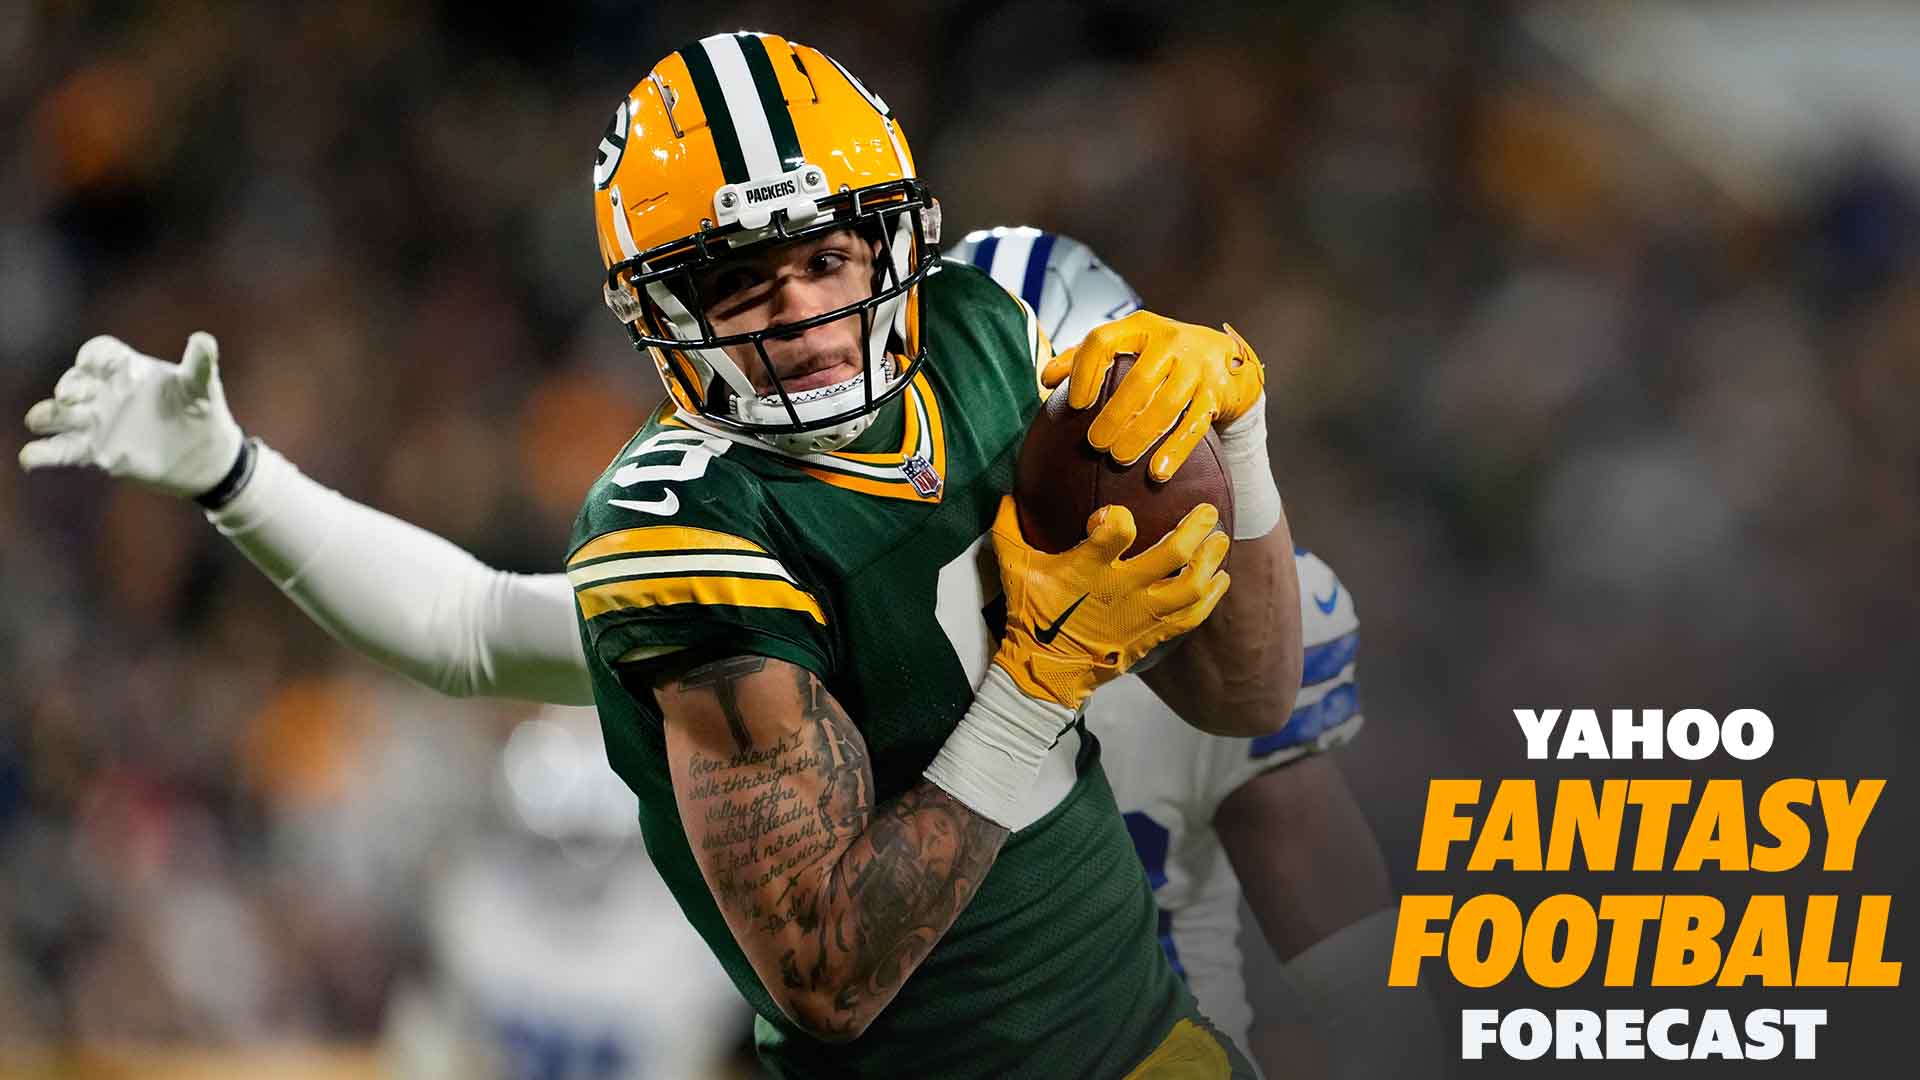 Thursday Night Football After Cowboys win, can the Packers salvage their season?